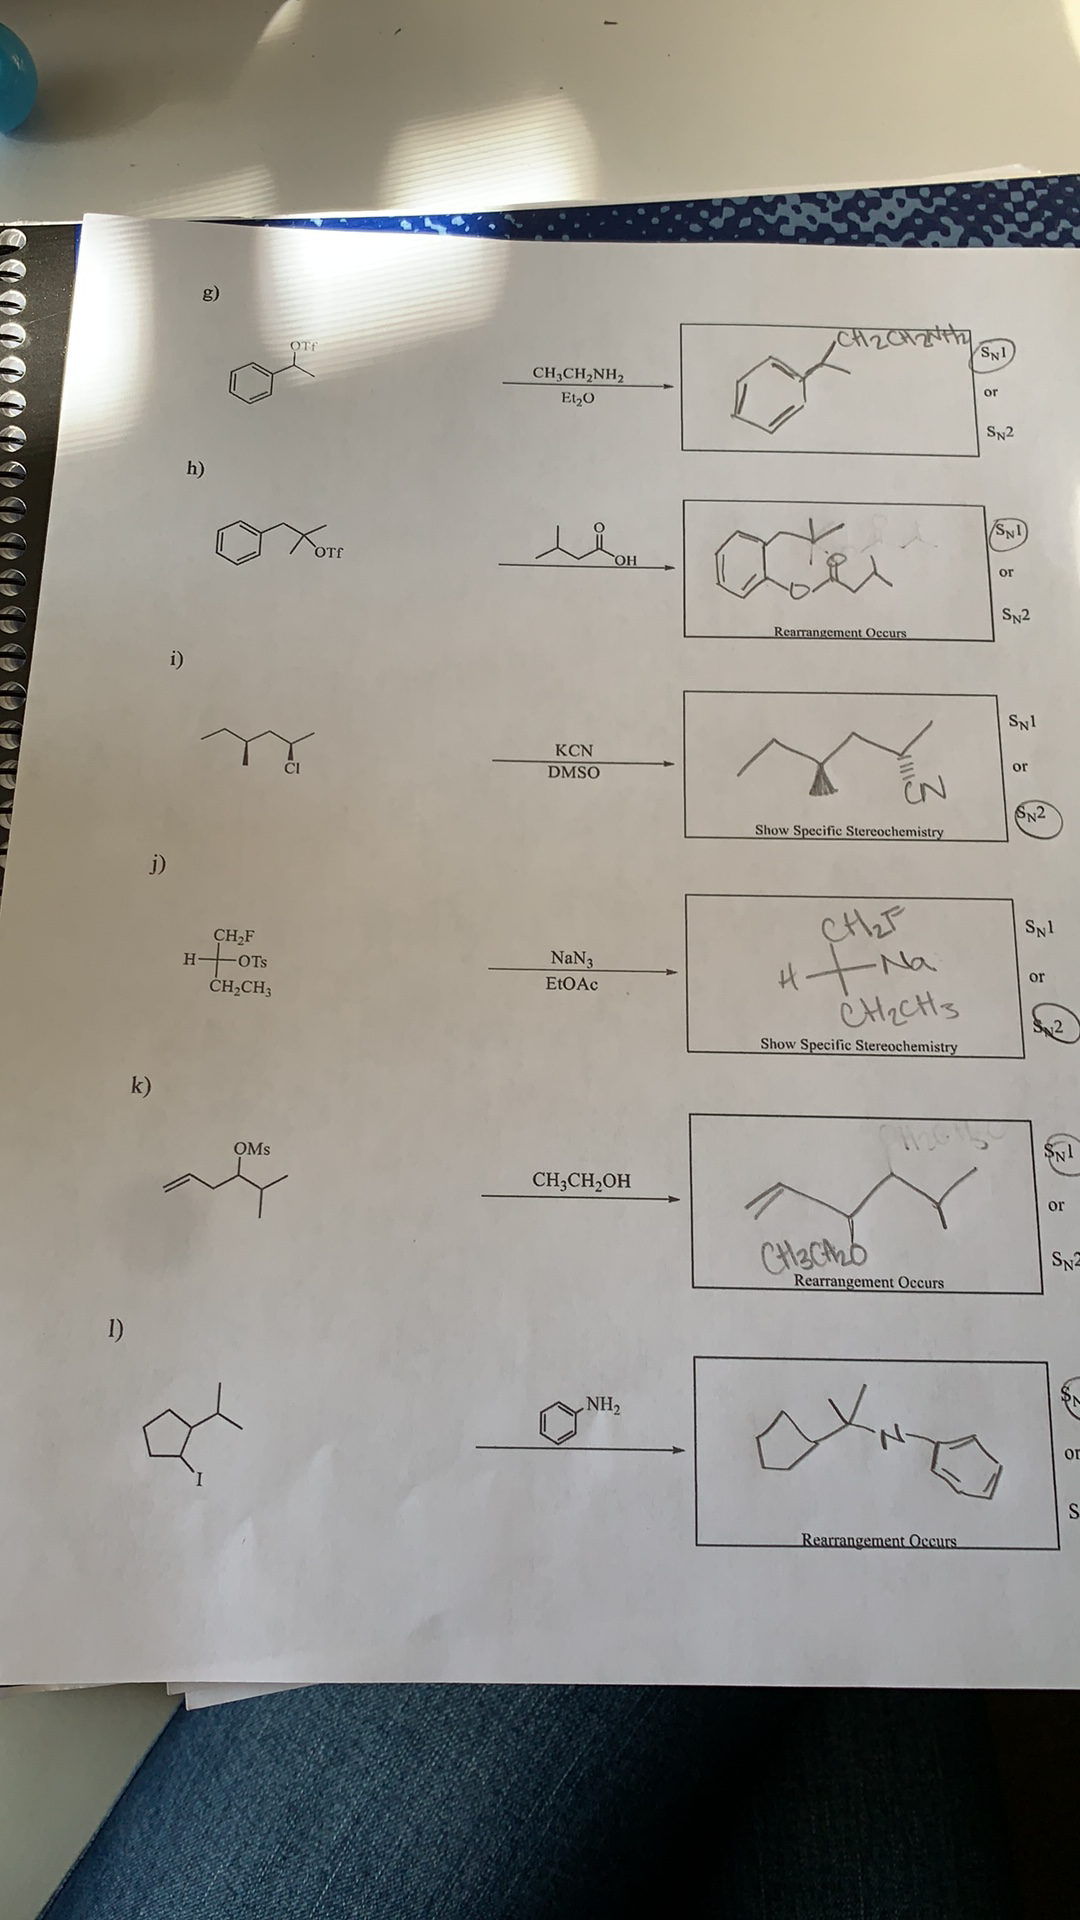 g)
SNI
CH,CH,NH2
or
Et,0
SN2
h)
OH
or
SN2
Rearrangement Occurs
i)
SNl
KCN
DMSO
or
SN2
Show Specific Stereochemistry
j)
CH,F
Htina
OTs
NaN3
or
ČHĄCH3
Show Specific Stereochemistry
k)
OMS
CH3CH,OH
or
Rearrangement Occurs
1)
NH2
or
S.
Rearrangement Occurs
